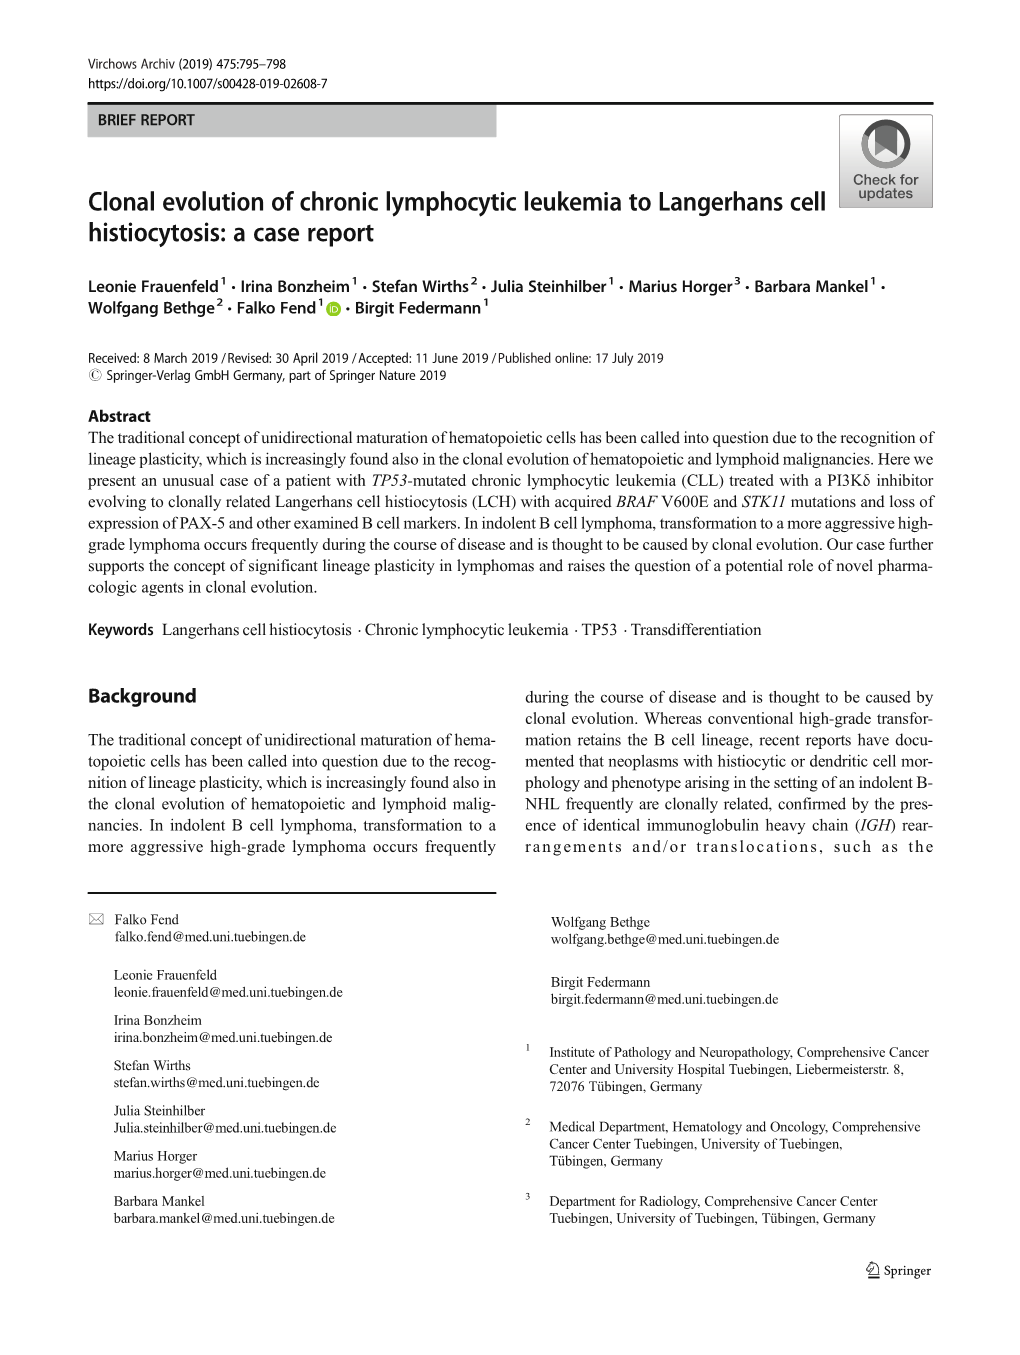 Clonal Evolution of Chronic Lymphocytic Leukemia to Langerhans Cell Histiocytosis: a Case Report